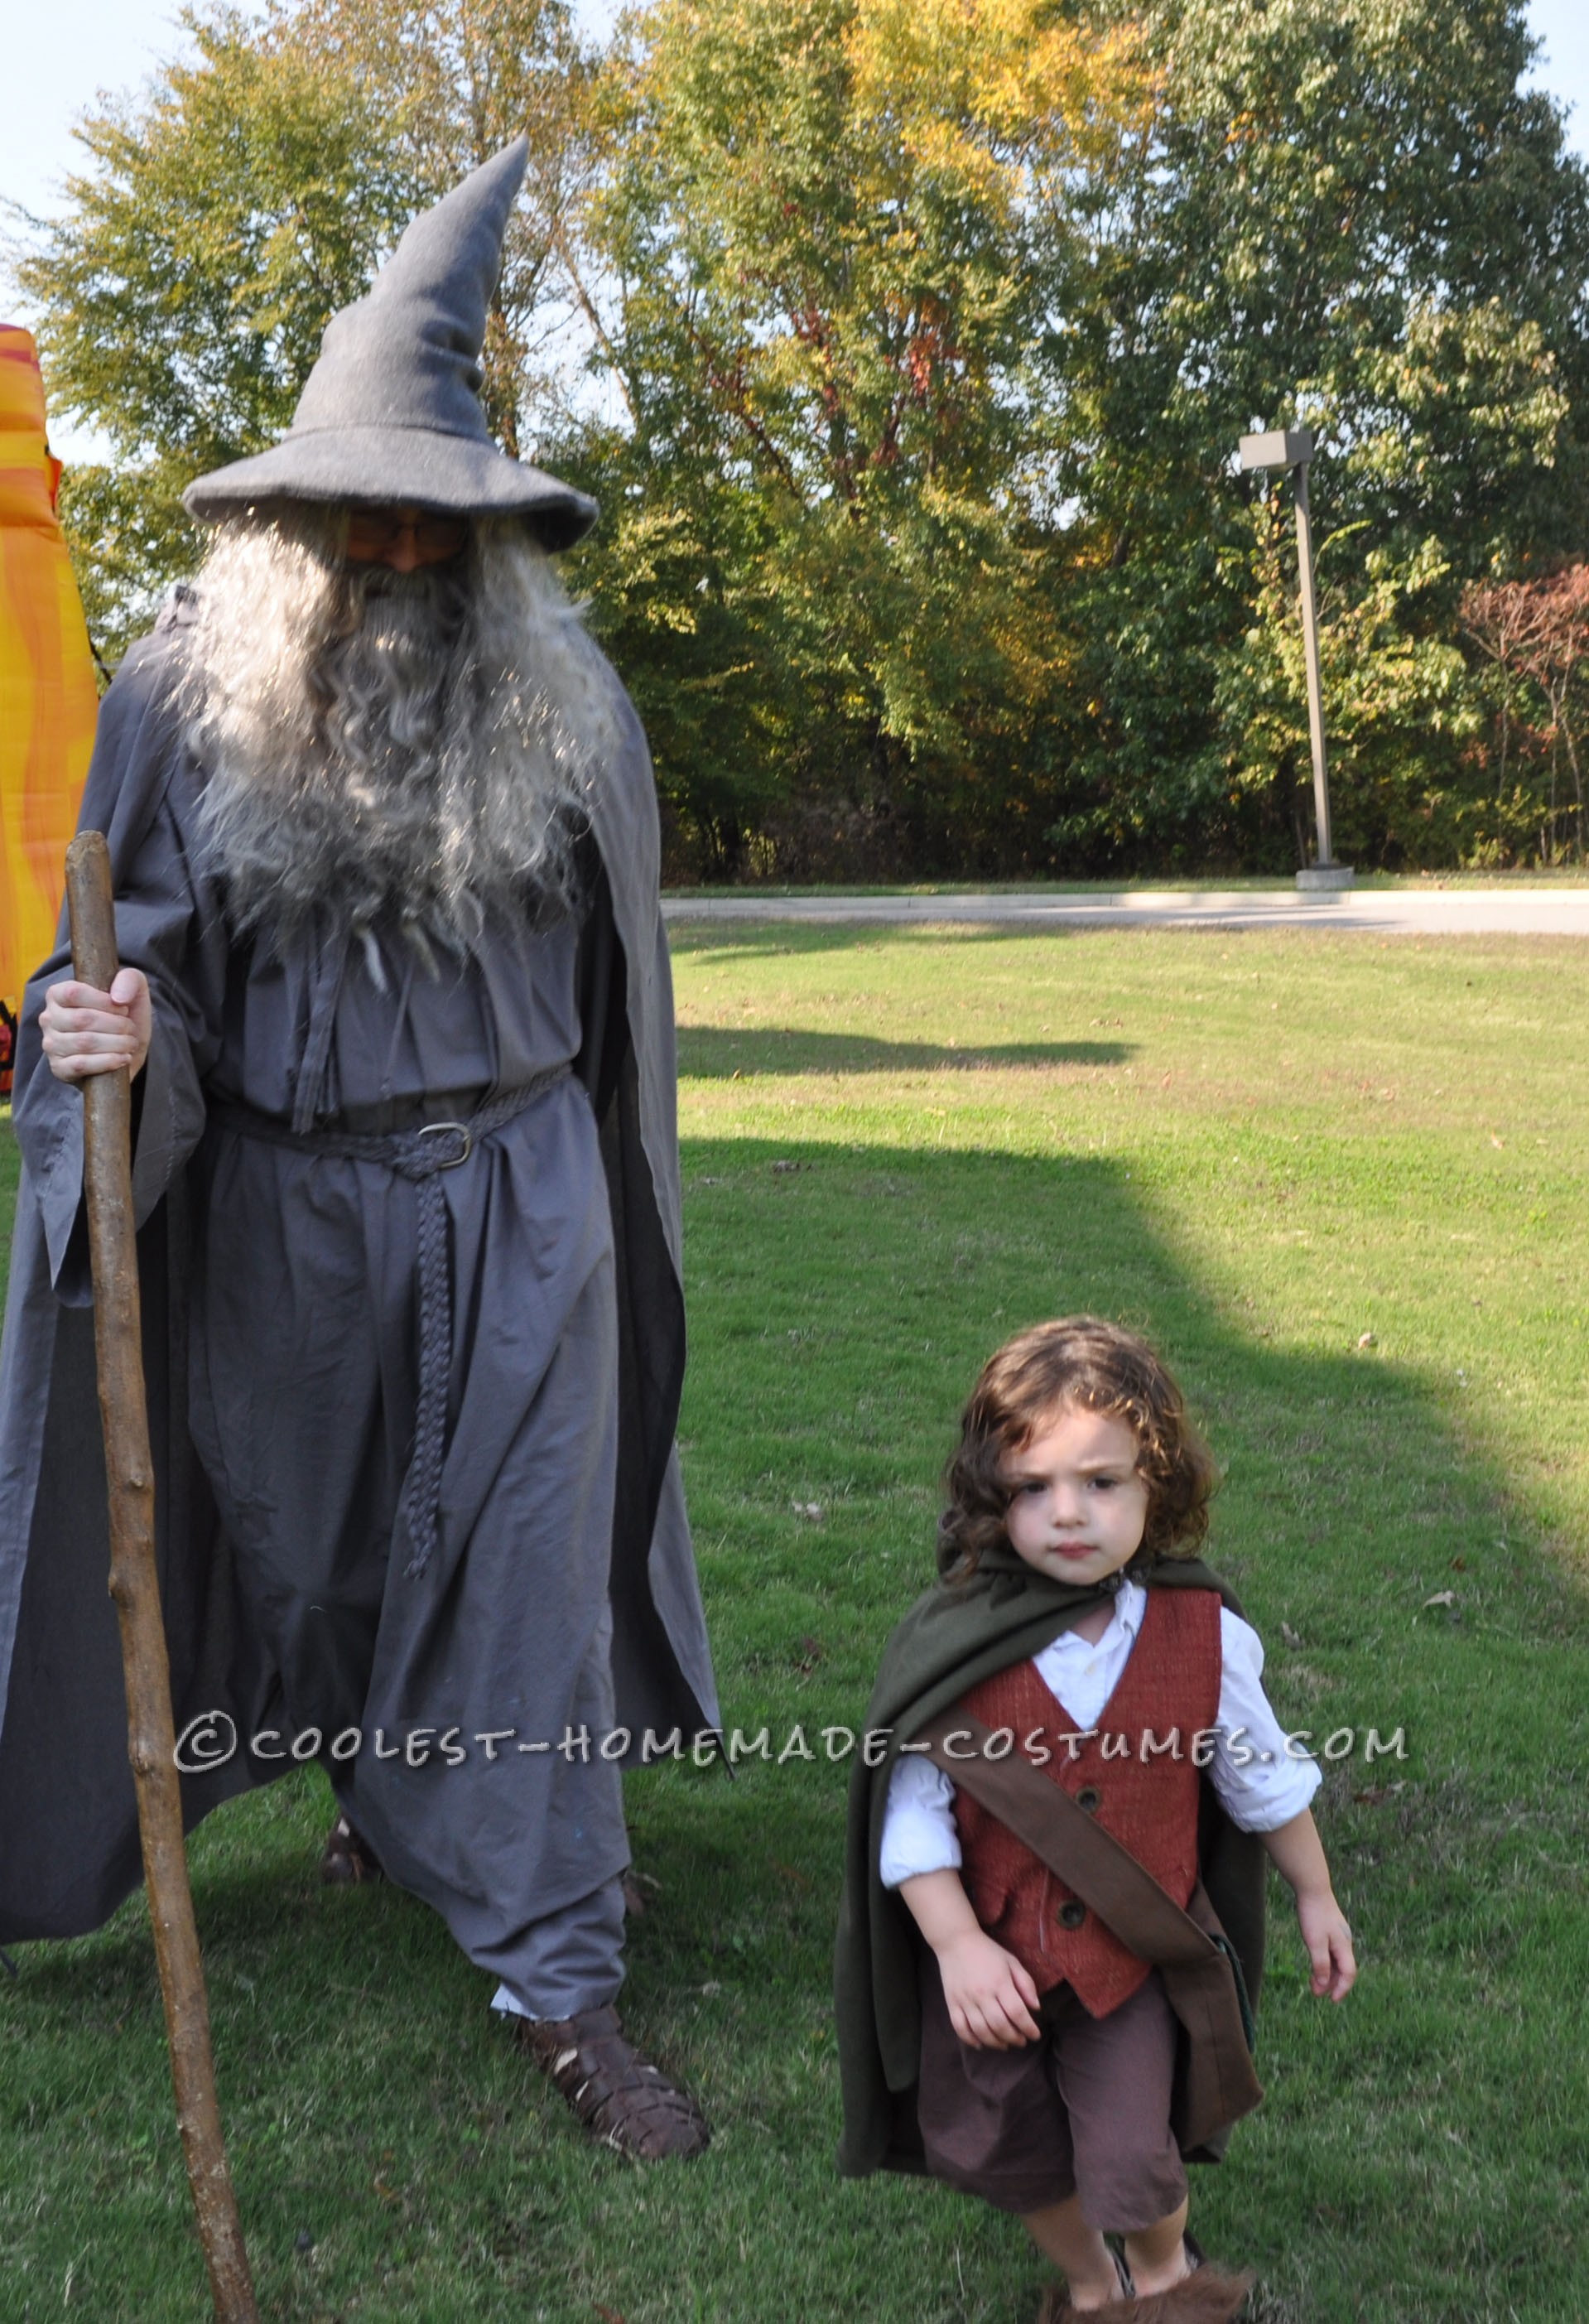 An Unexpected Lord of the Rings Halloween Journey